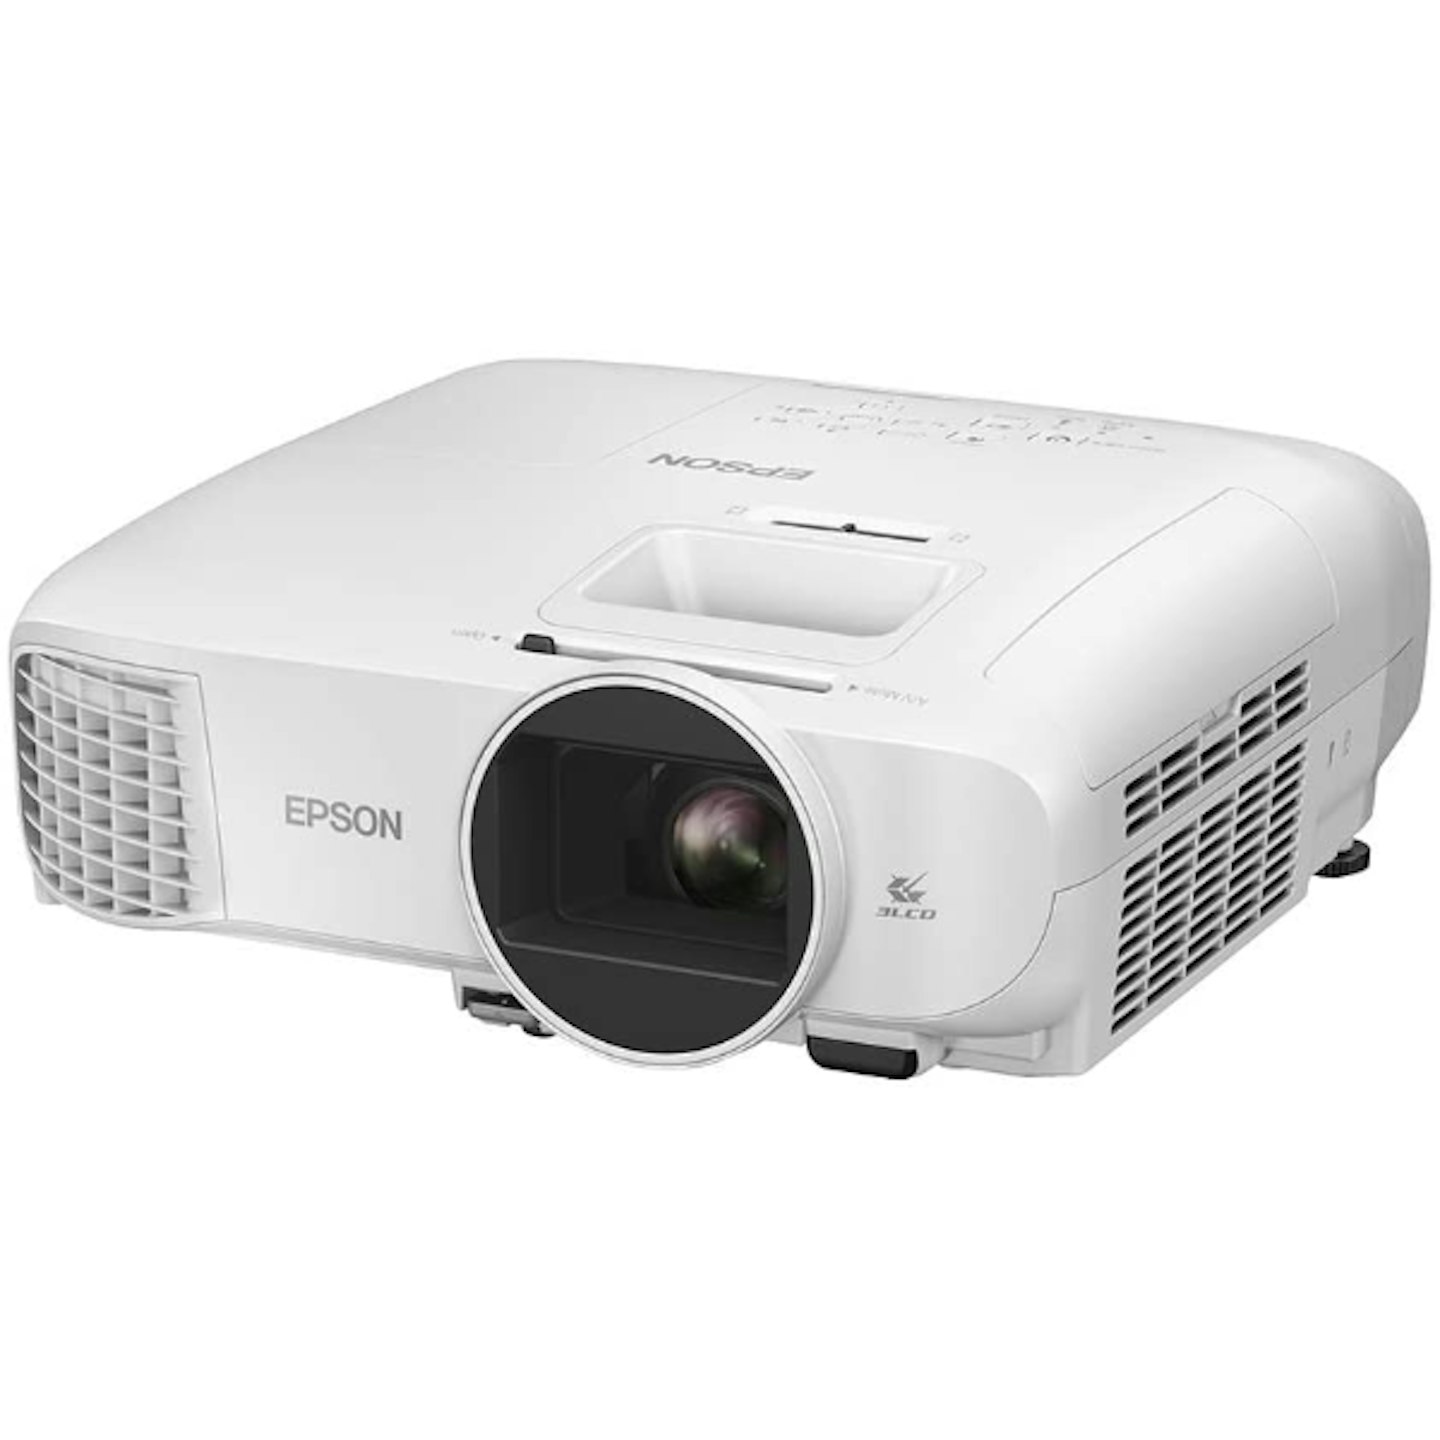 Epson EH-TW5700 Smart Home Cinema Full-HD Projector